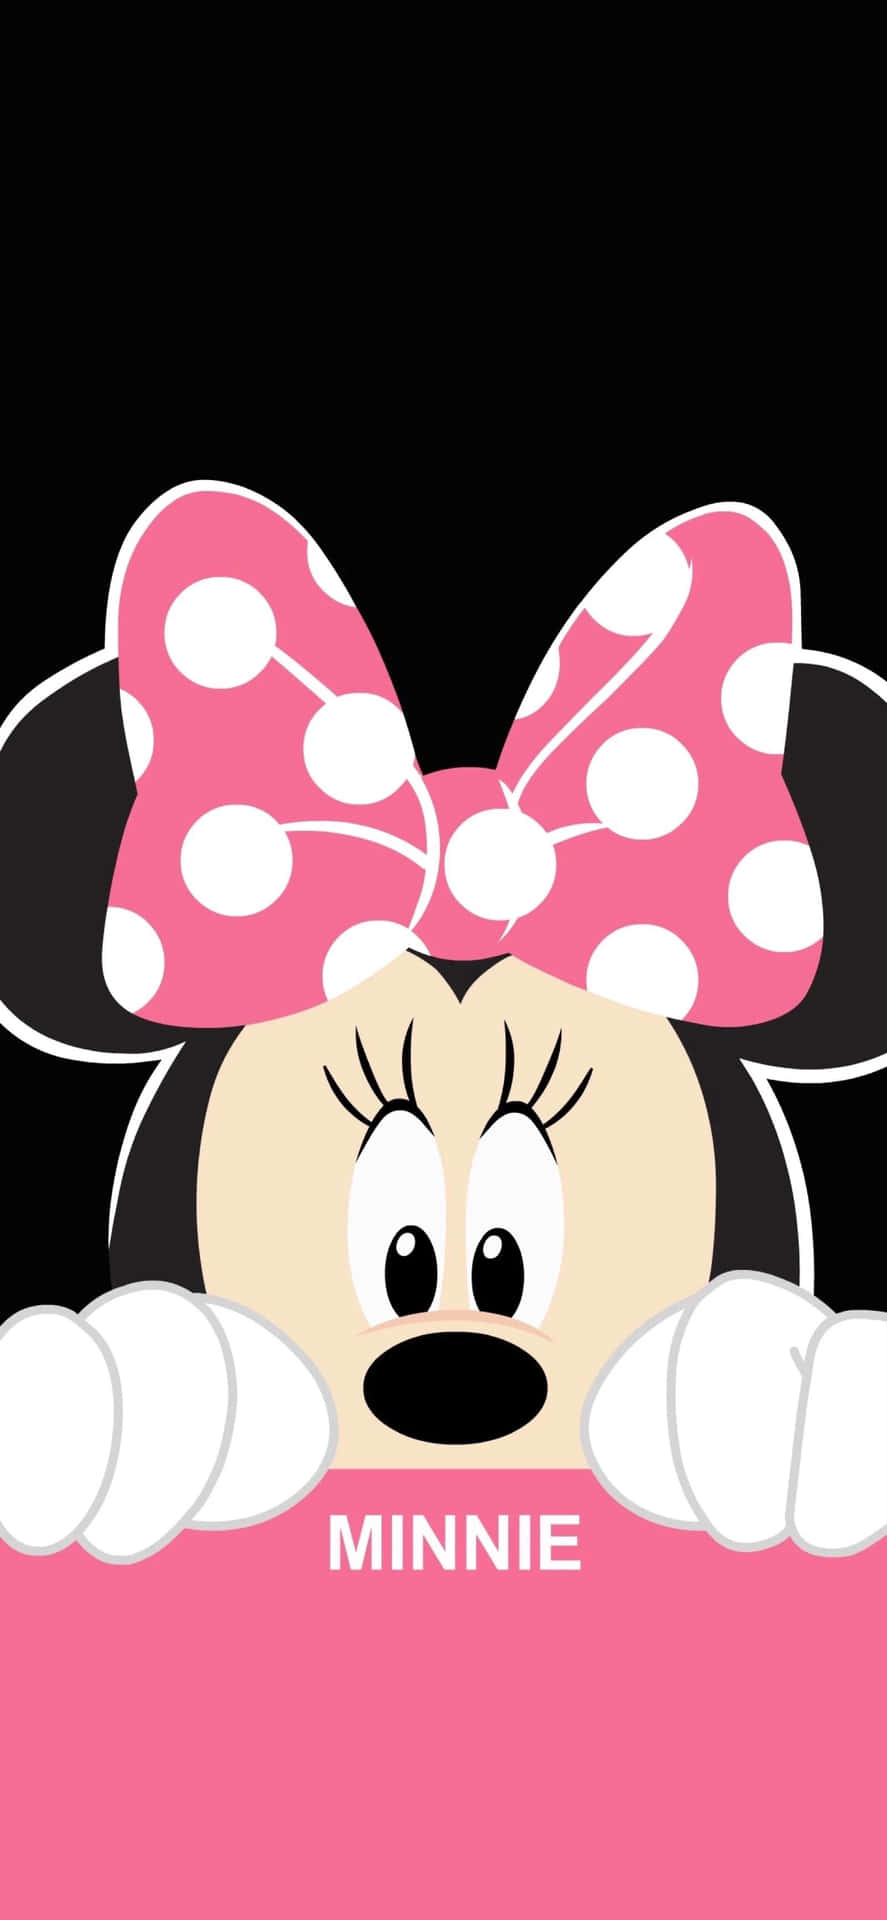 Minnie Mouse In Pink Wallpaper